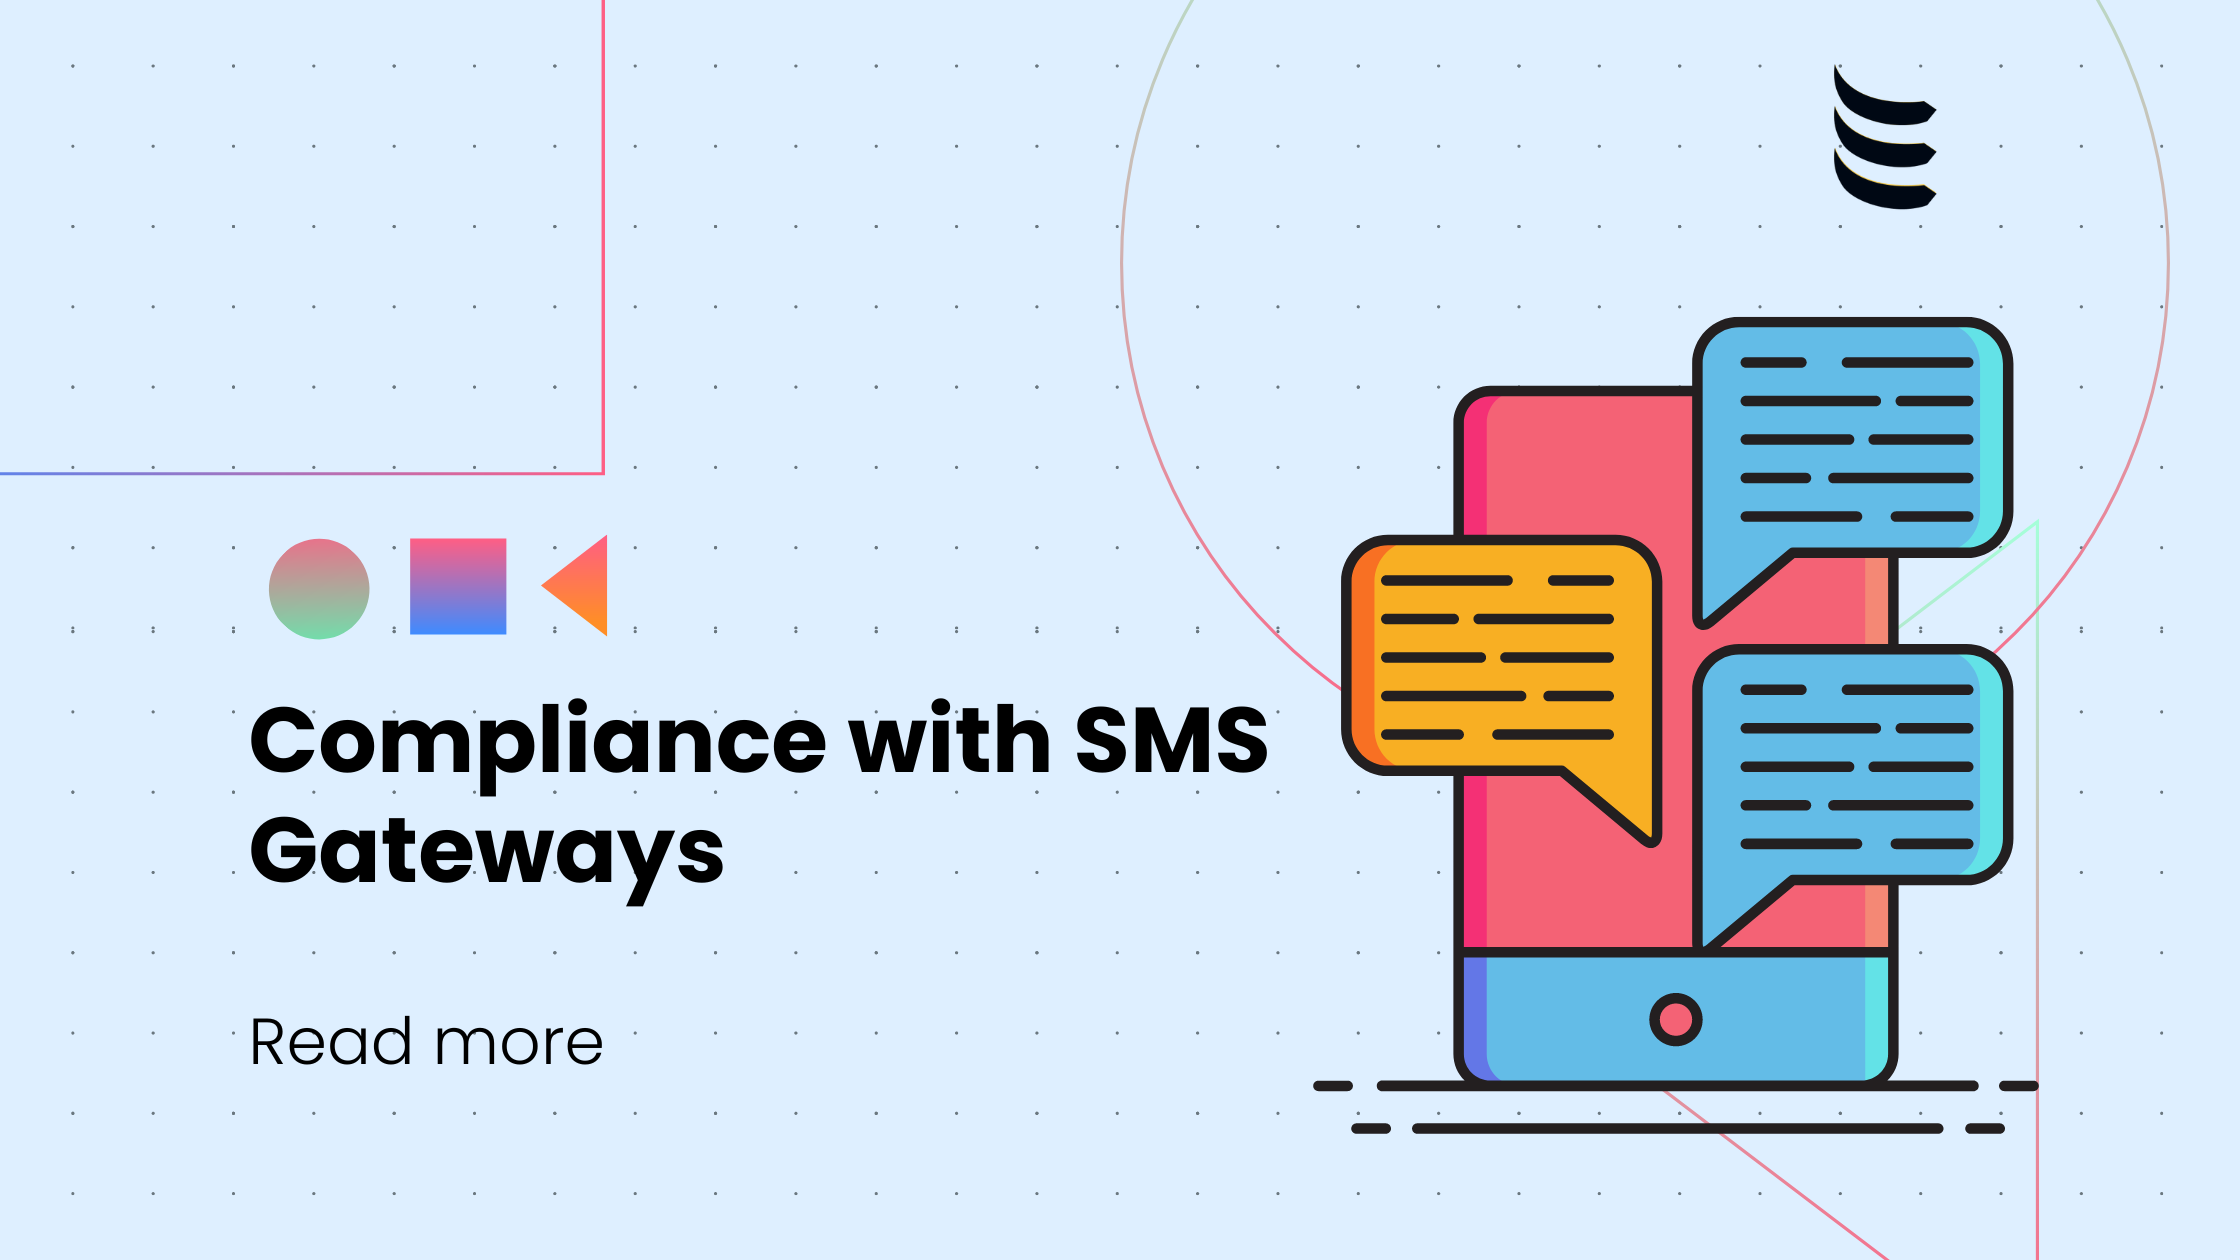 Compliance with SMS Gateways